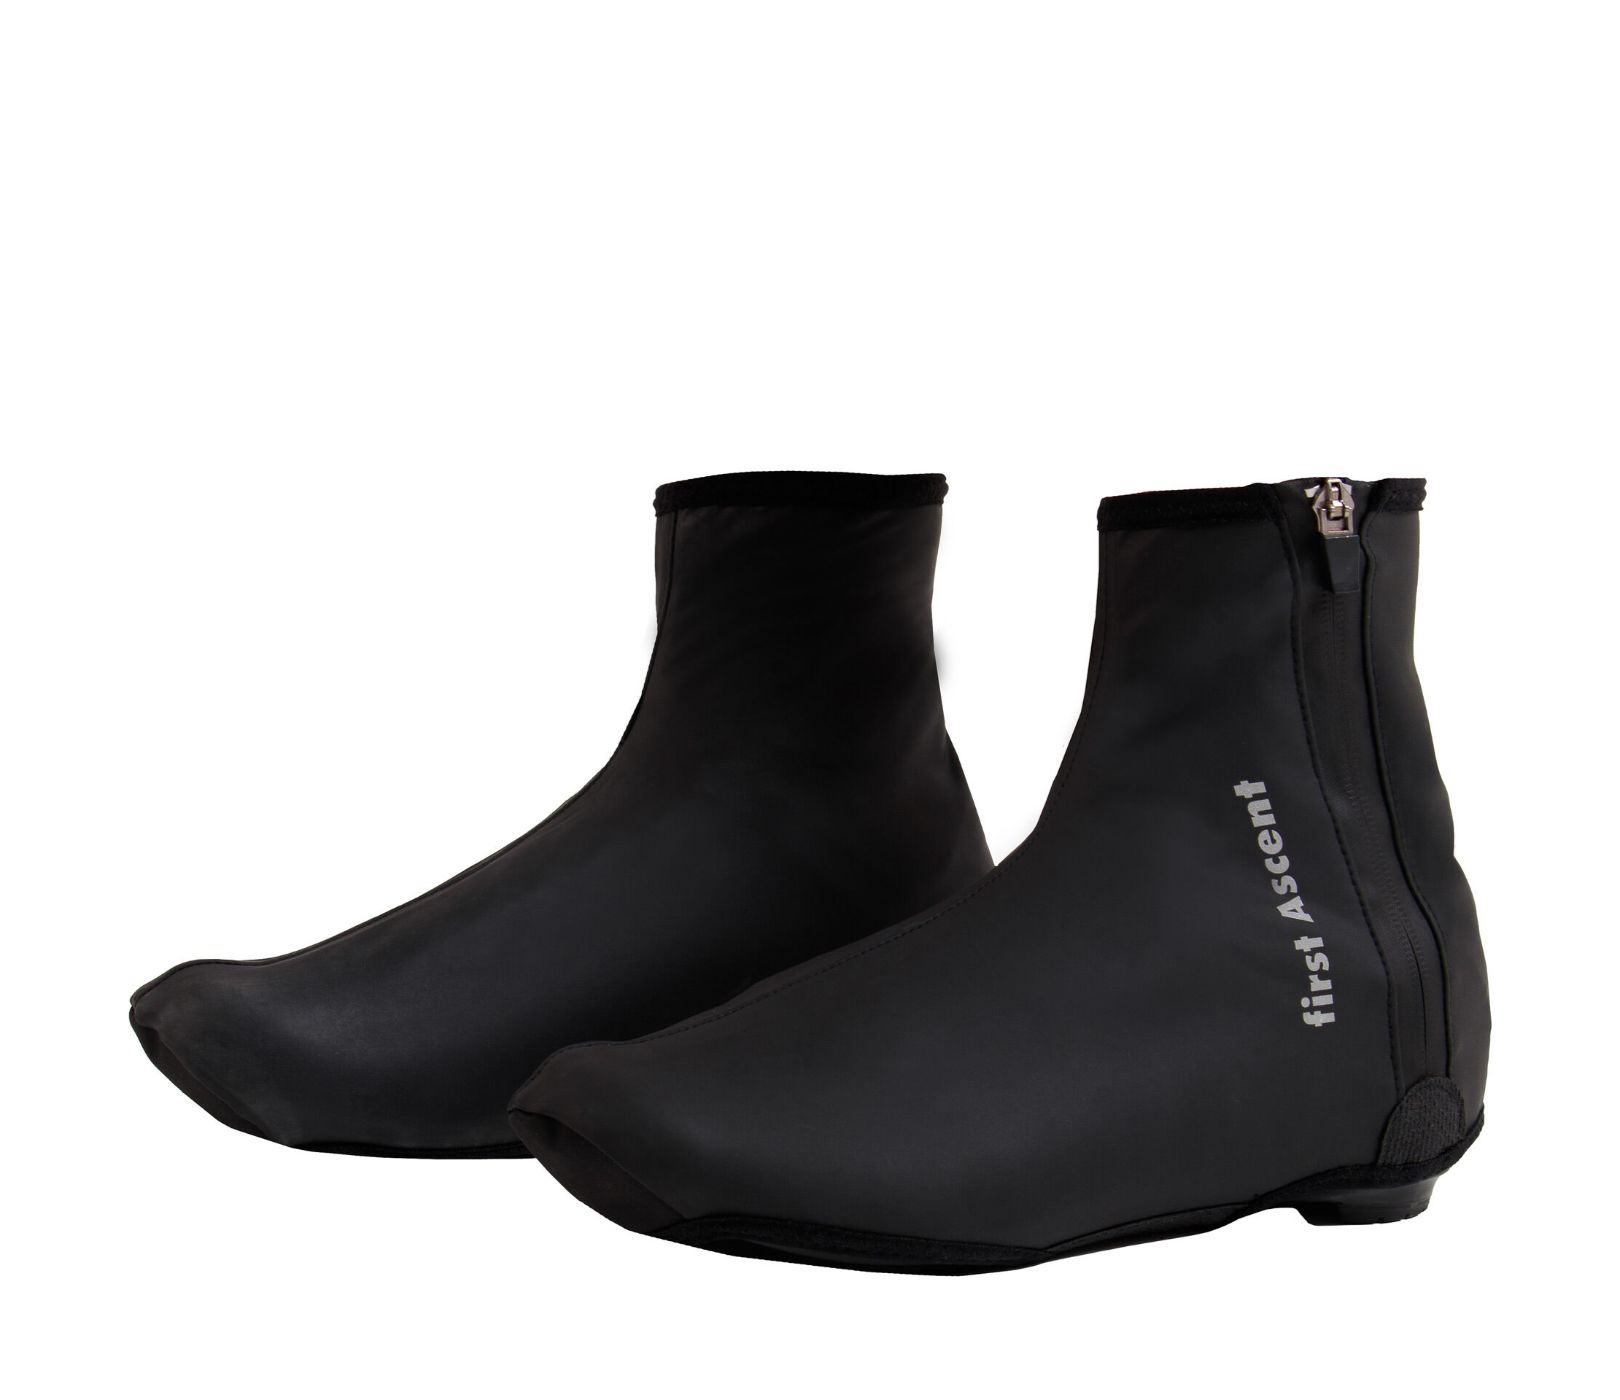 First Ascent Black Cycling Booties